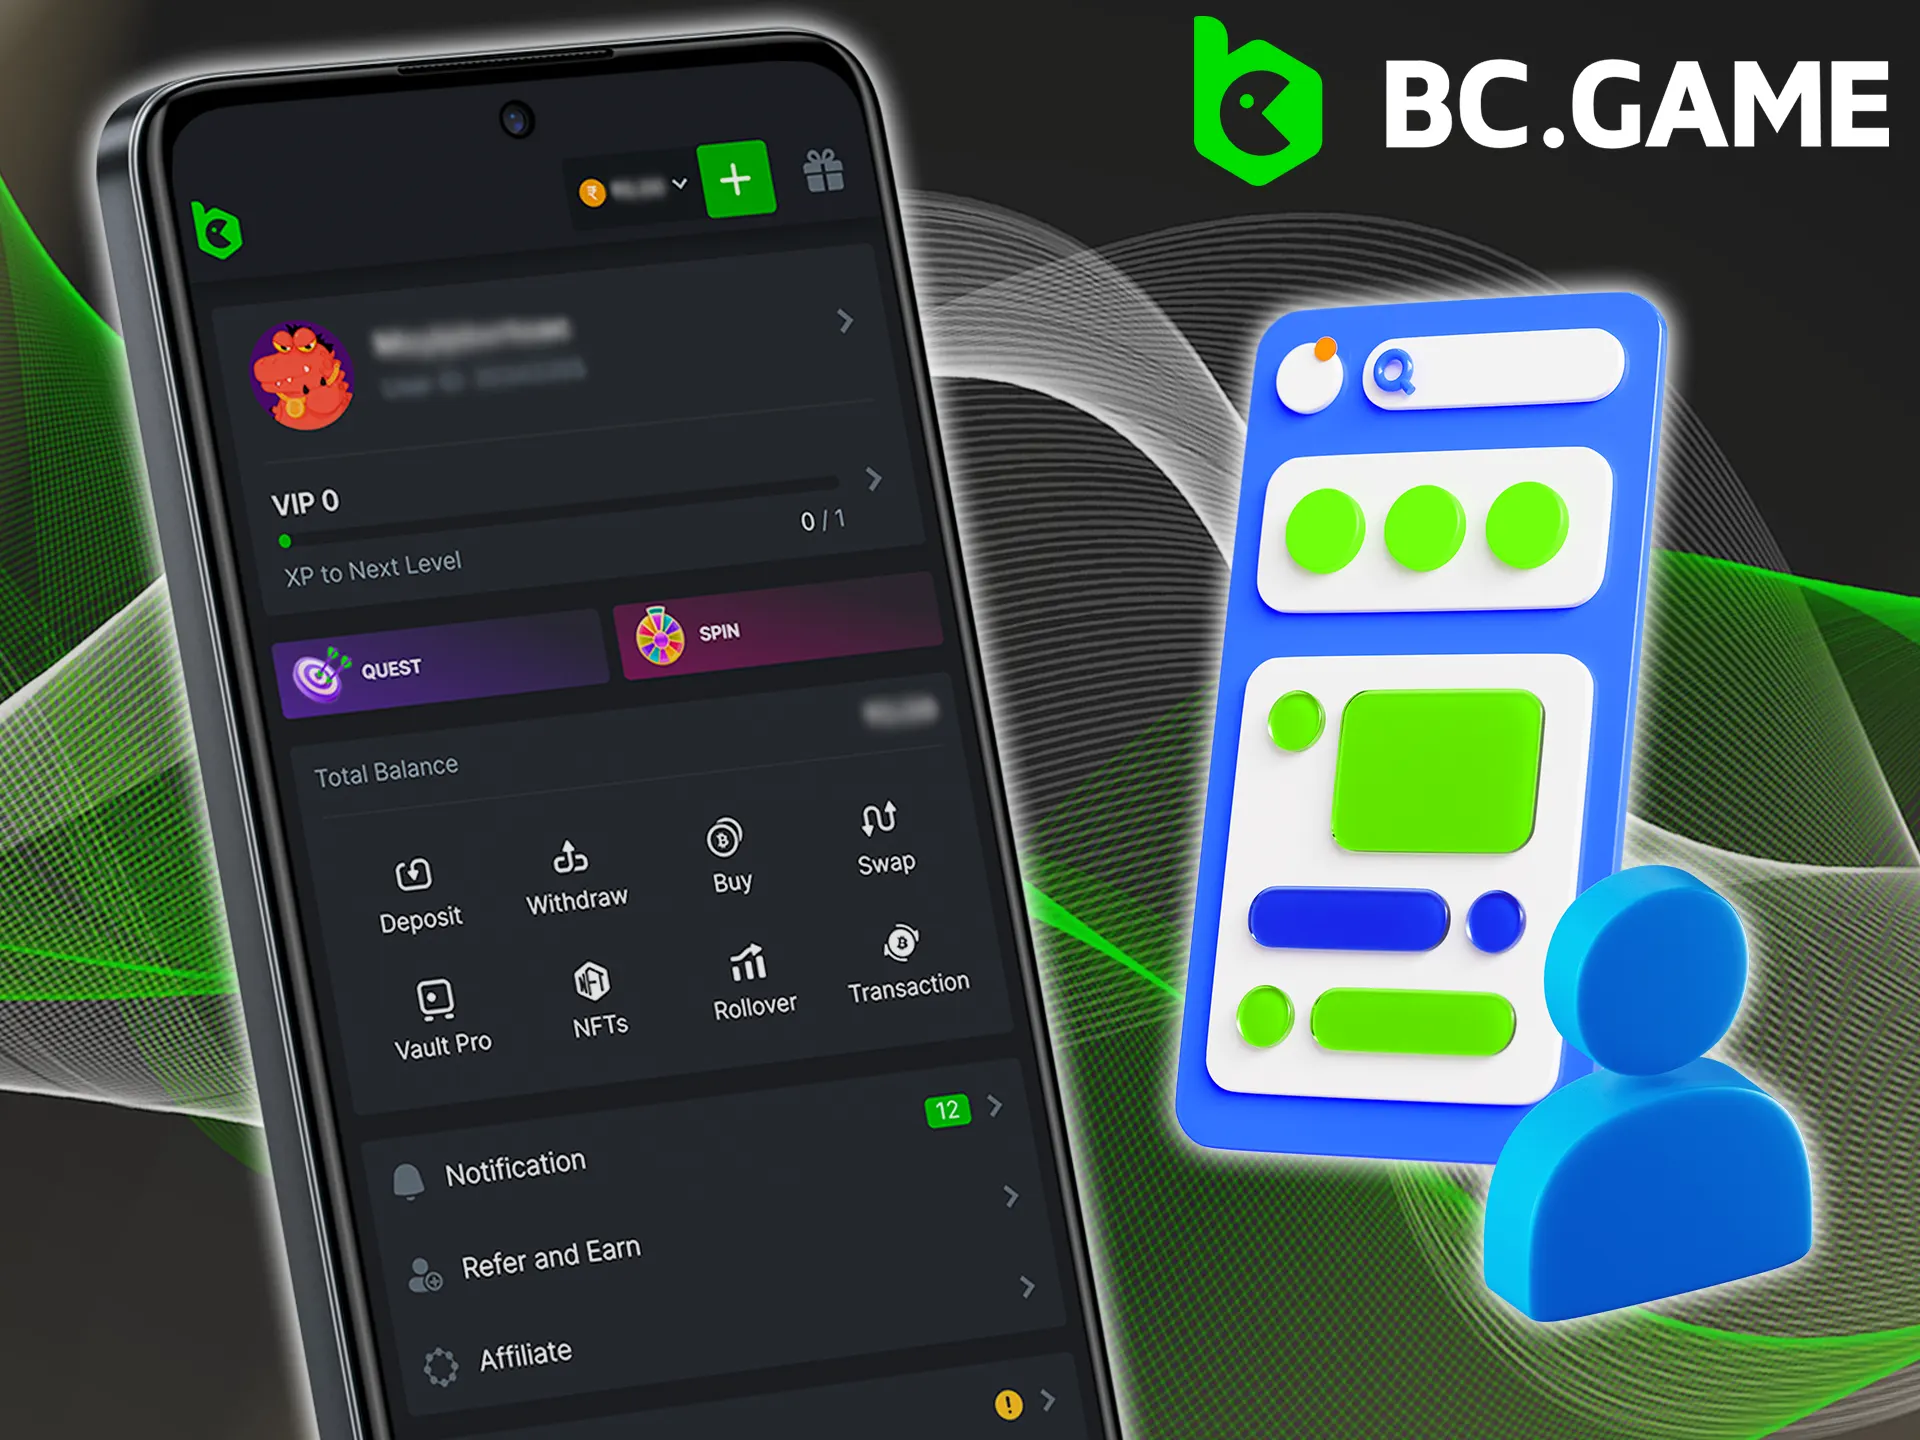 Open BC Game and familiarize yourself with all the features of the platform.